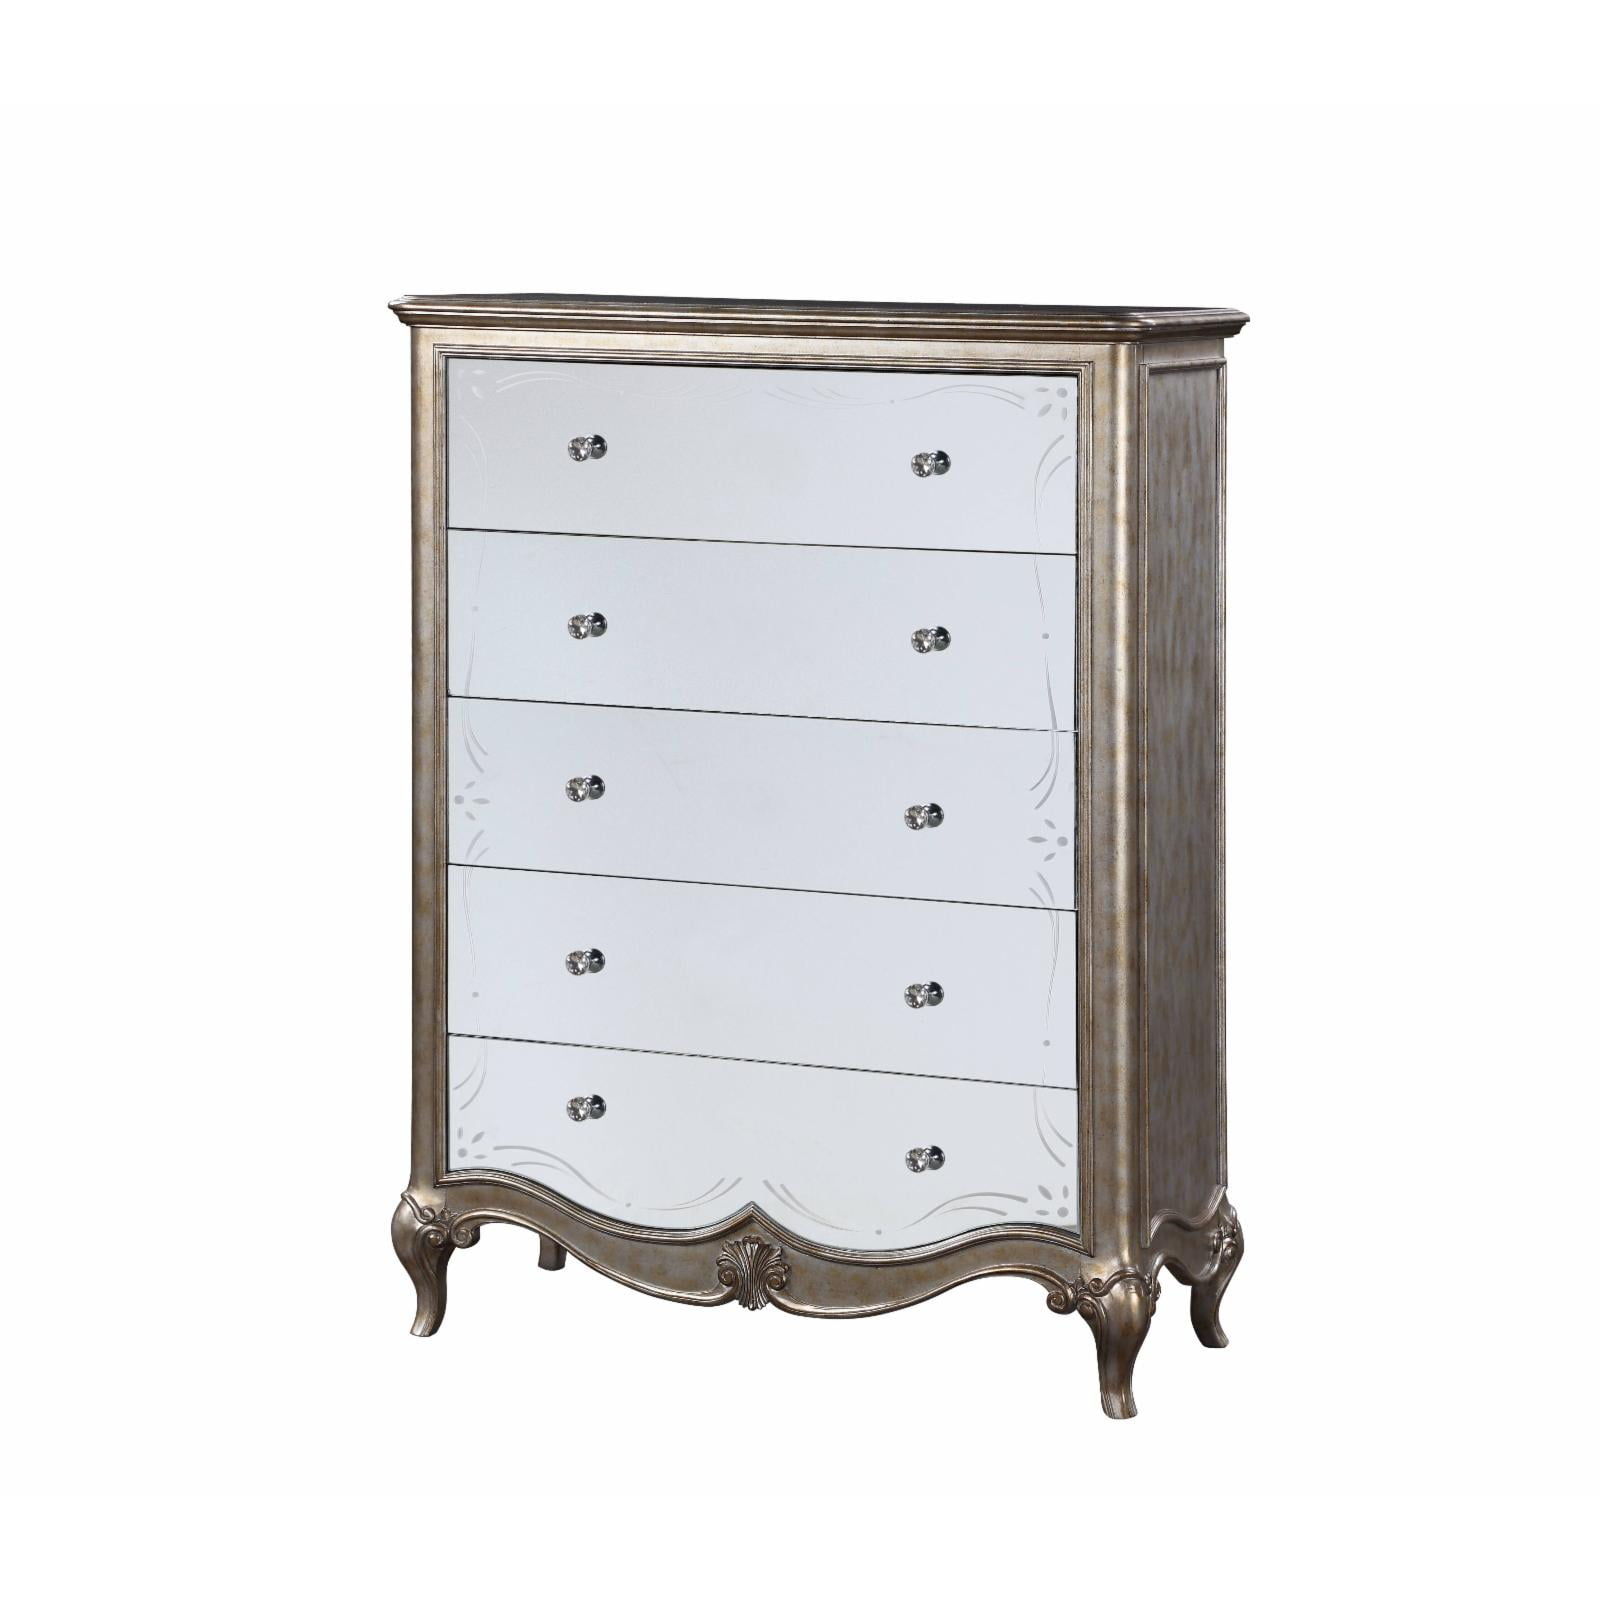 Picture of ACME Furniture 22206 Esteban 5 Drawer Chest, Antique Champagne